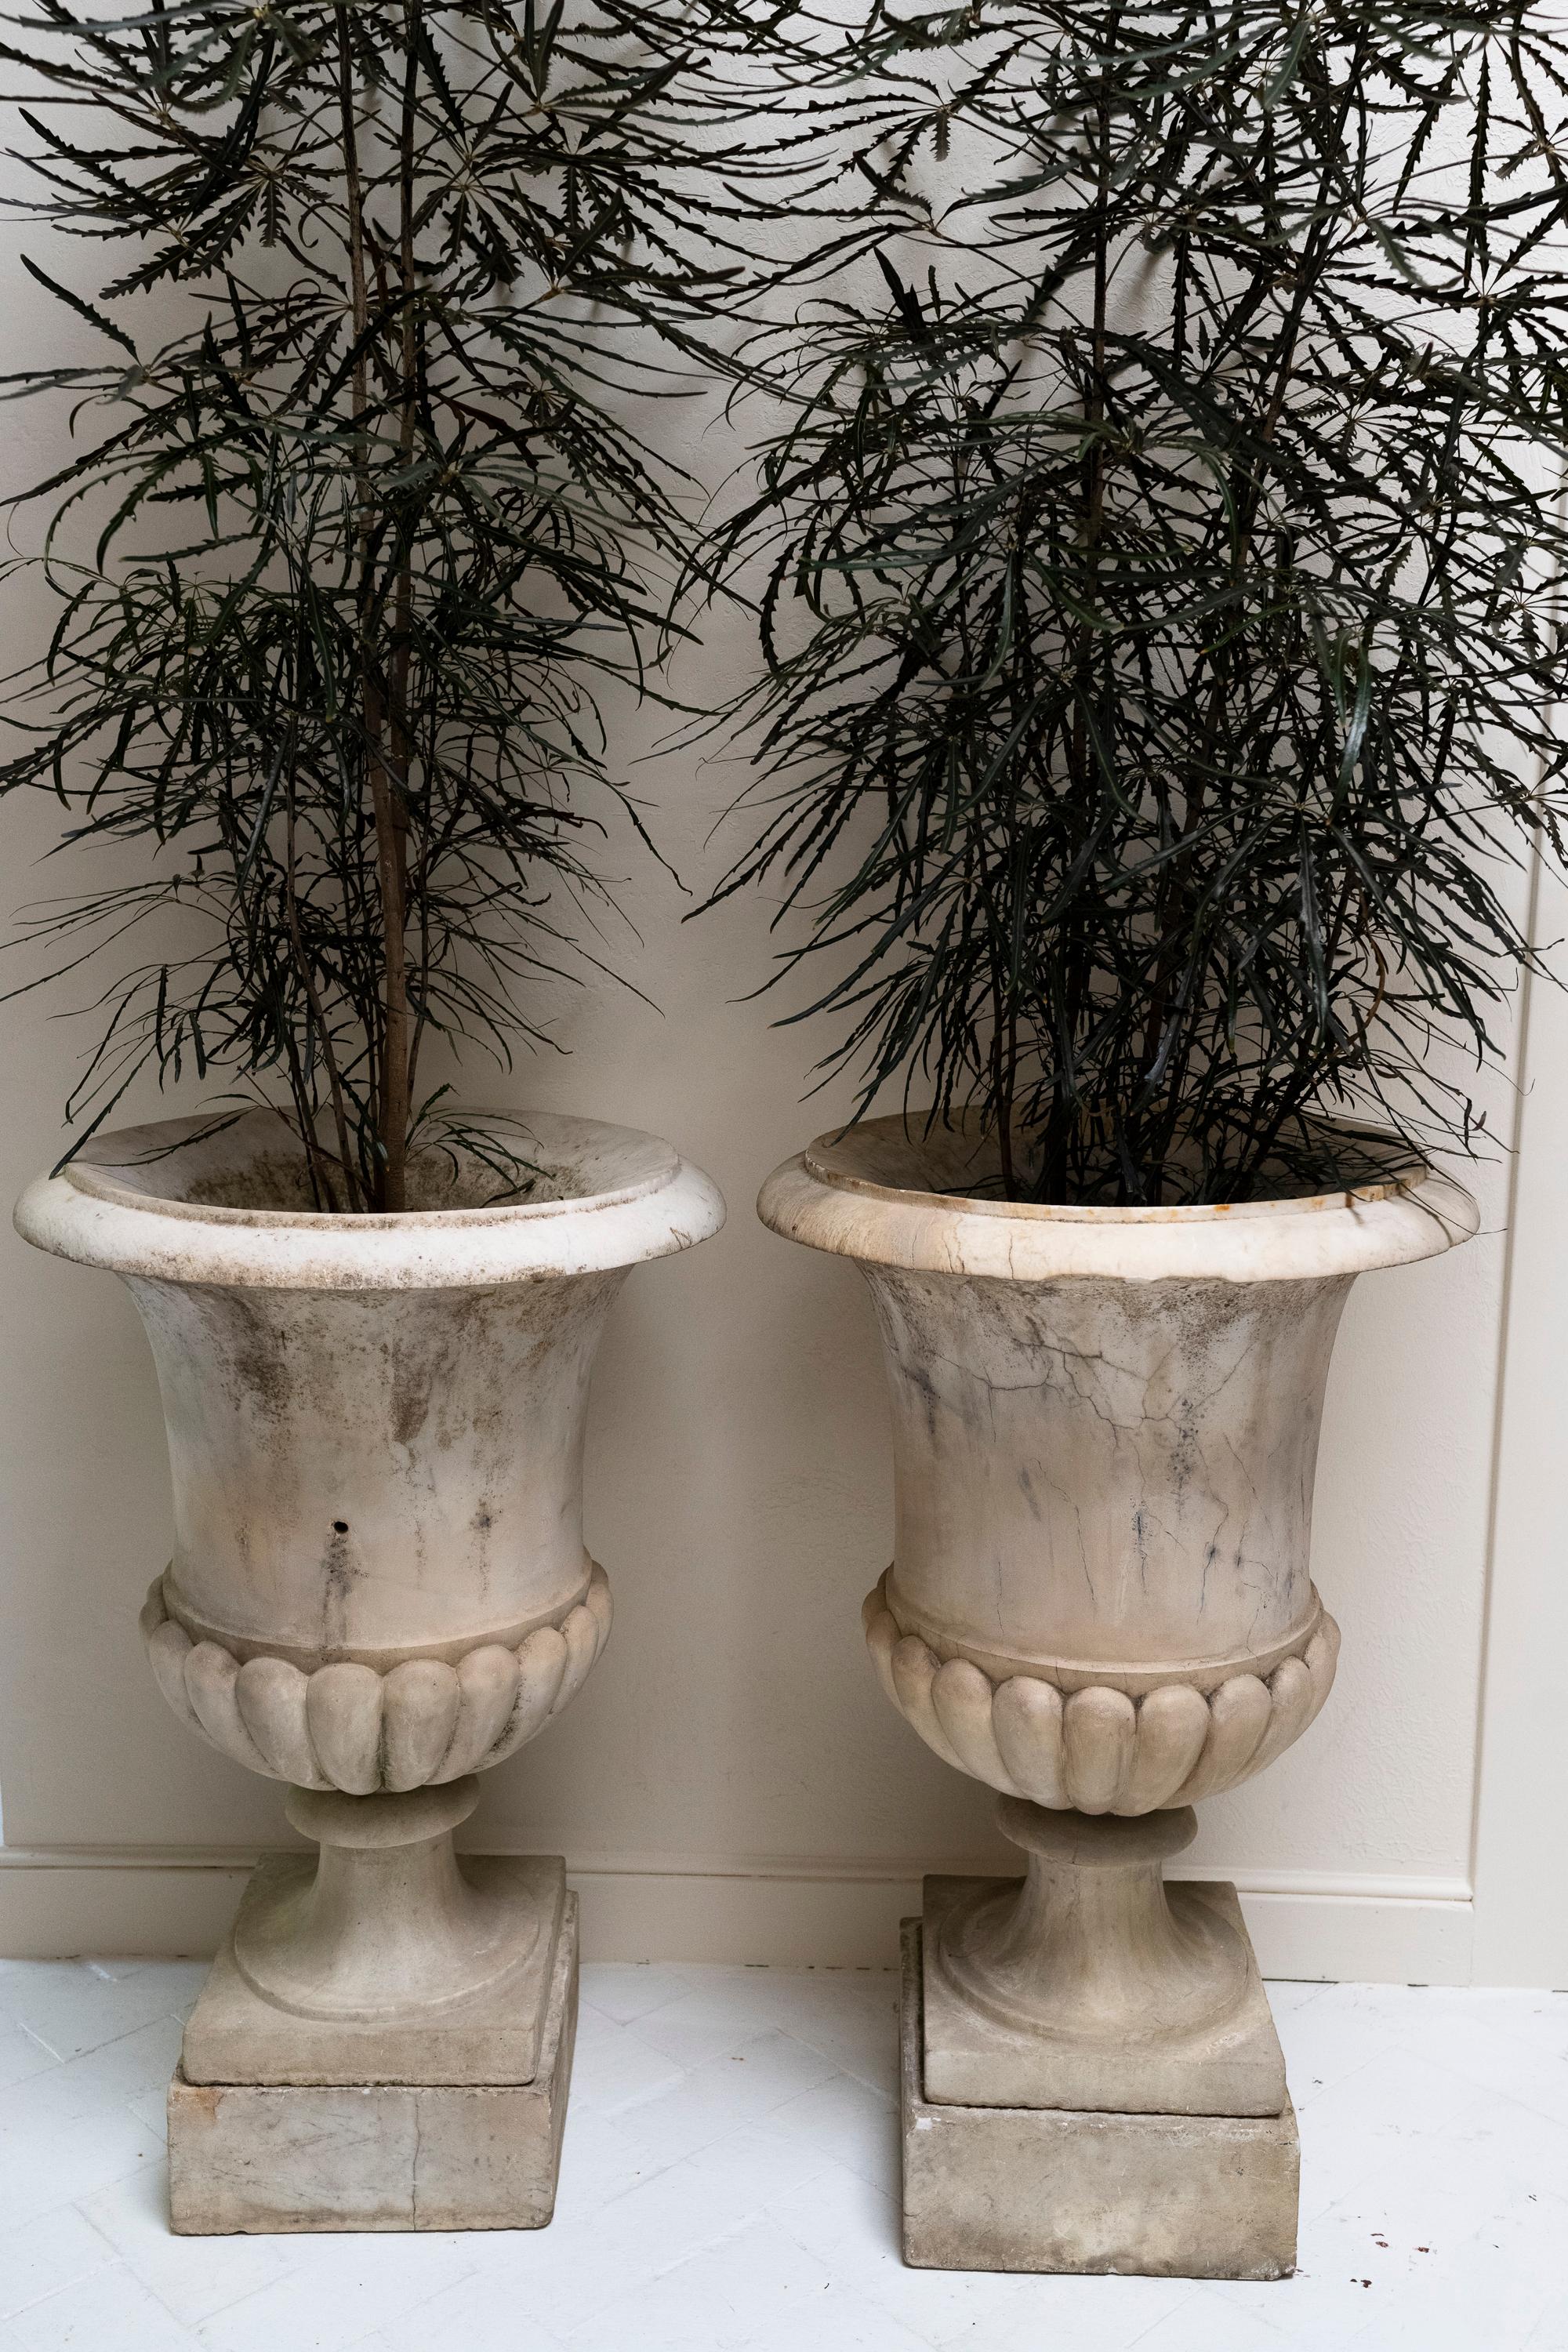 Made in Italy during the 18th century, these Carrara marble Medici style planters adorned either side of the front door of the French chateau from which they came, and feature their original separate marble-covered stone bases.
These may be used